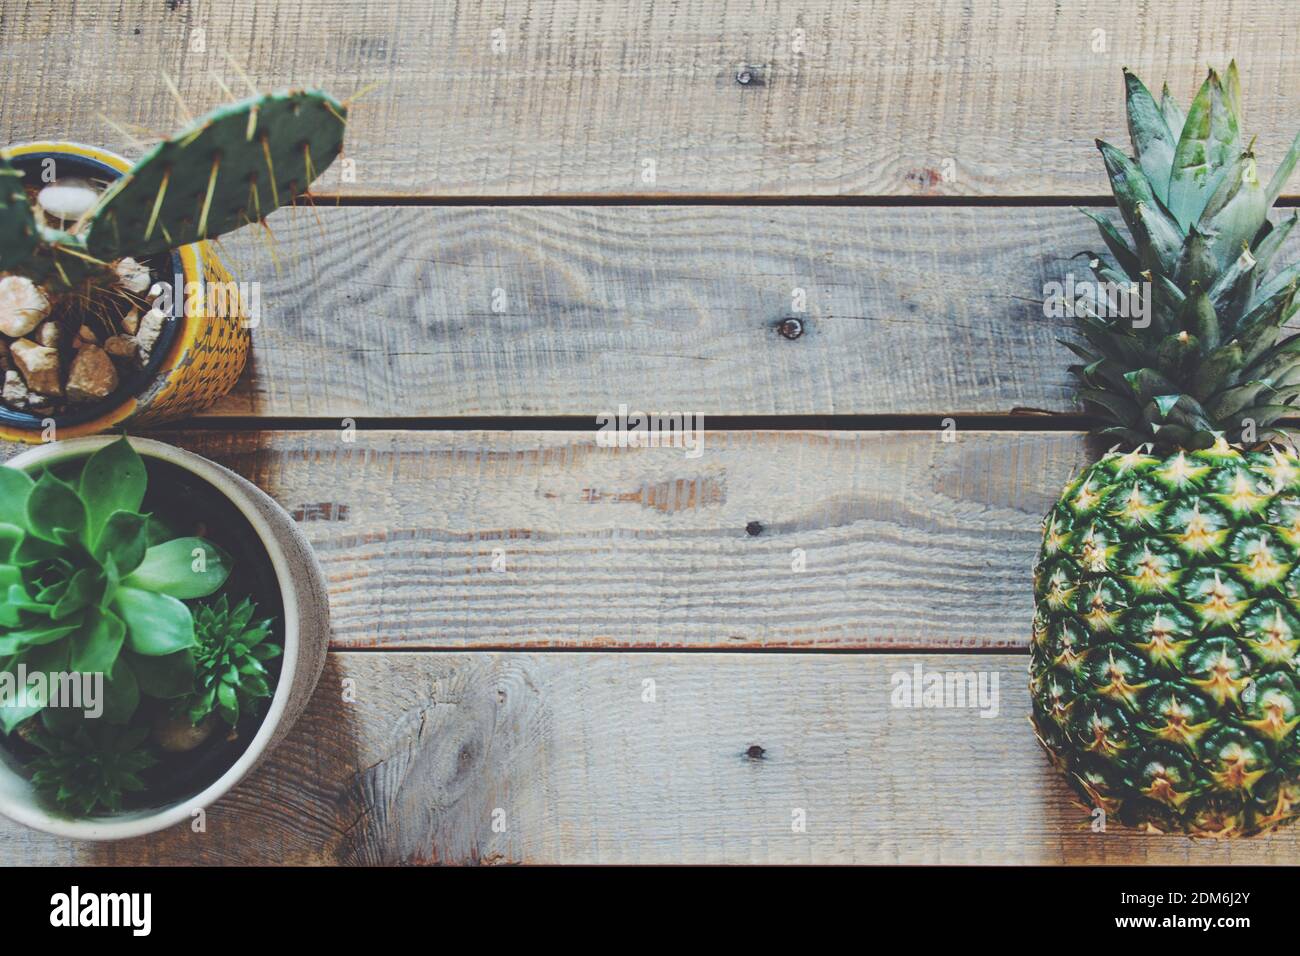 High Angle View Of Plants And Pineapple On Wooden Table. Copy Spce. Stock Photo